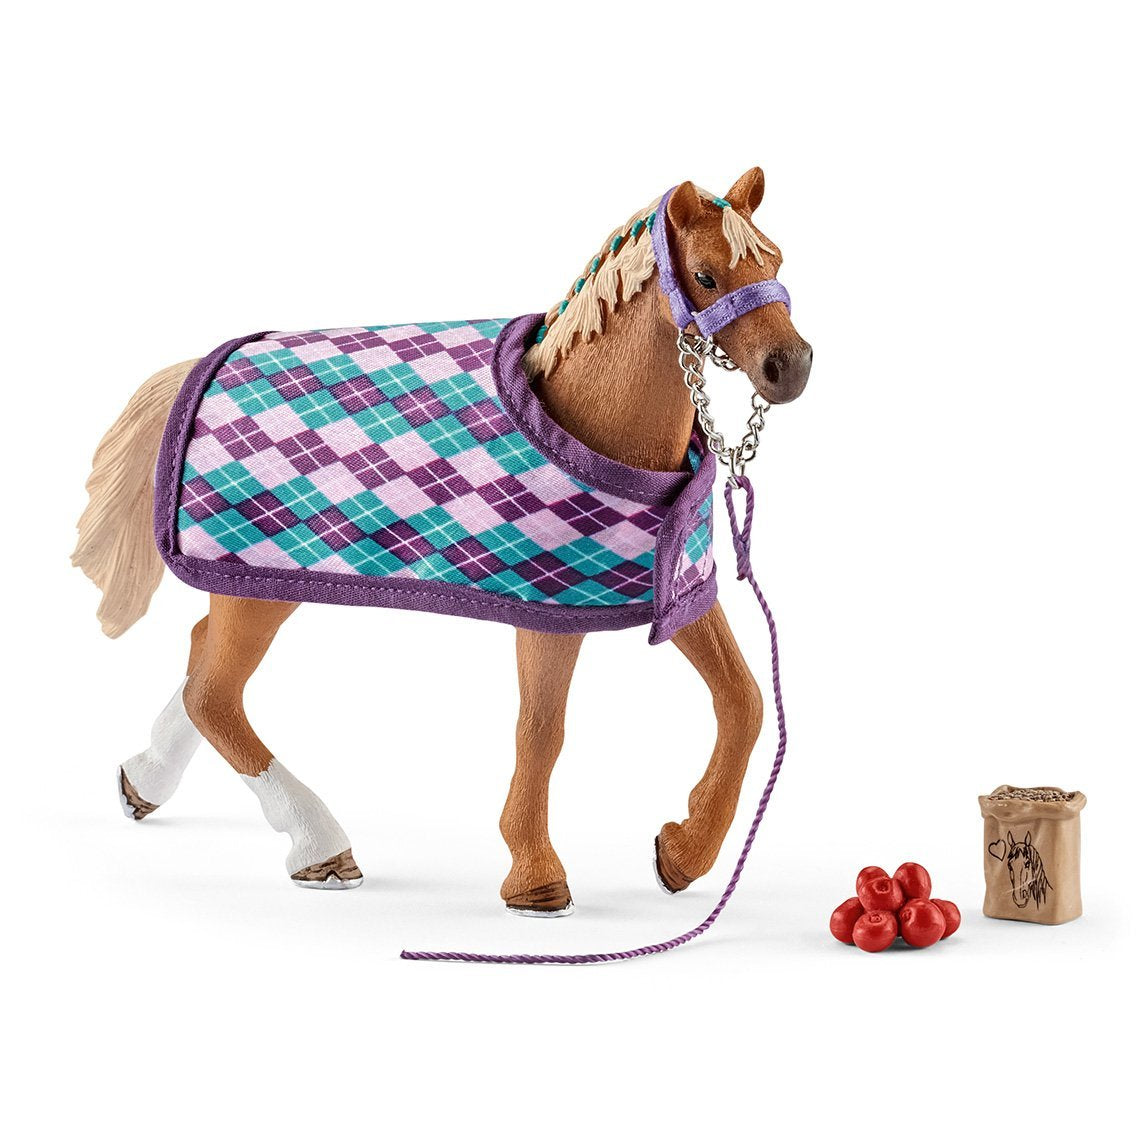 SL42360 Schleich English Thoroughbred with Blanket and Accessories (1:24 Scale)